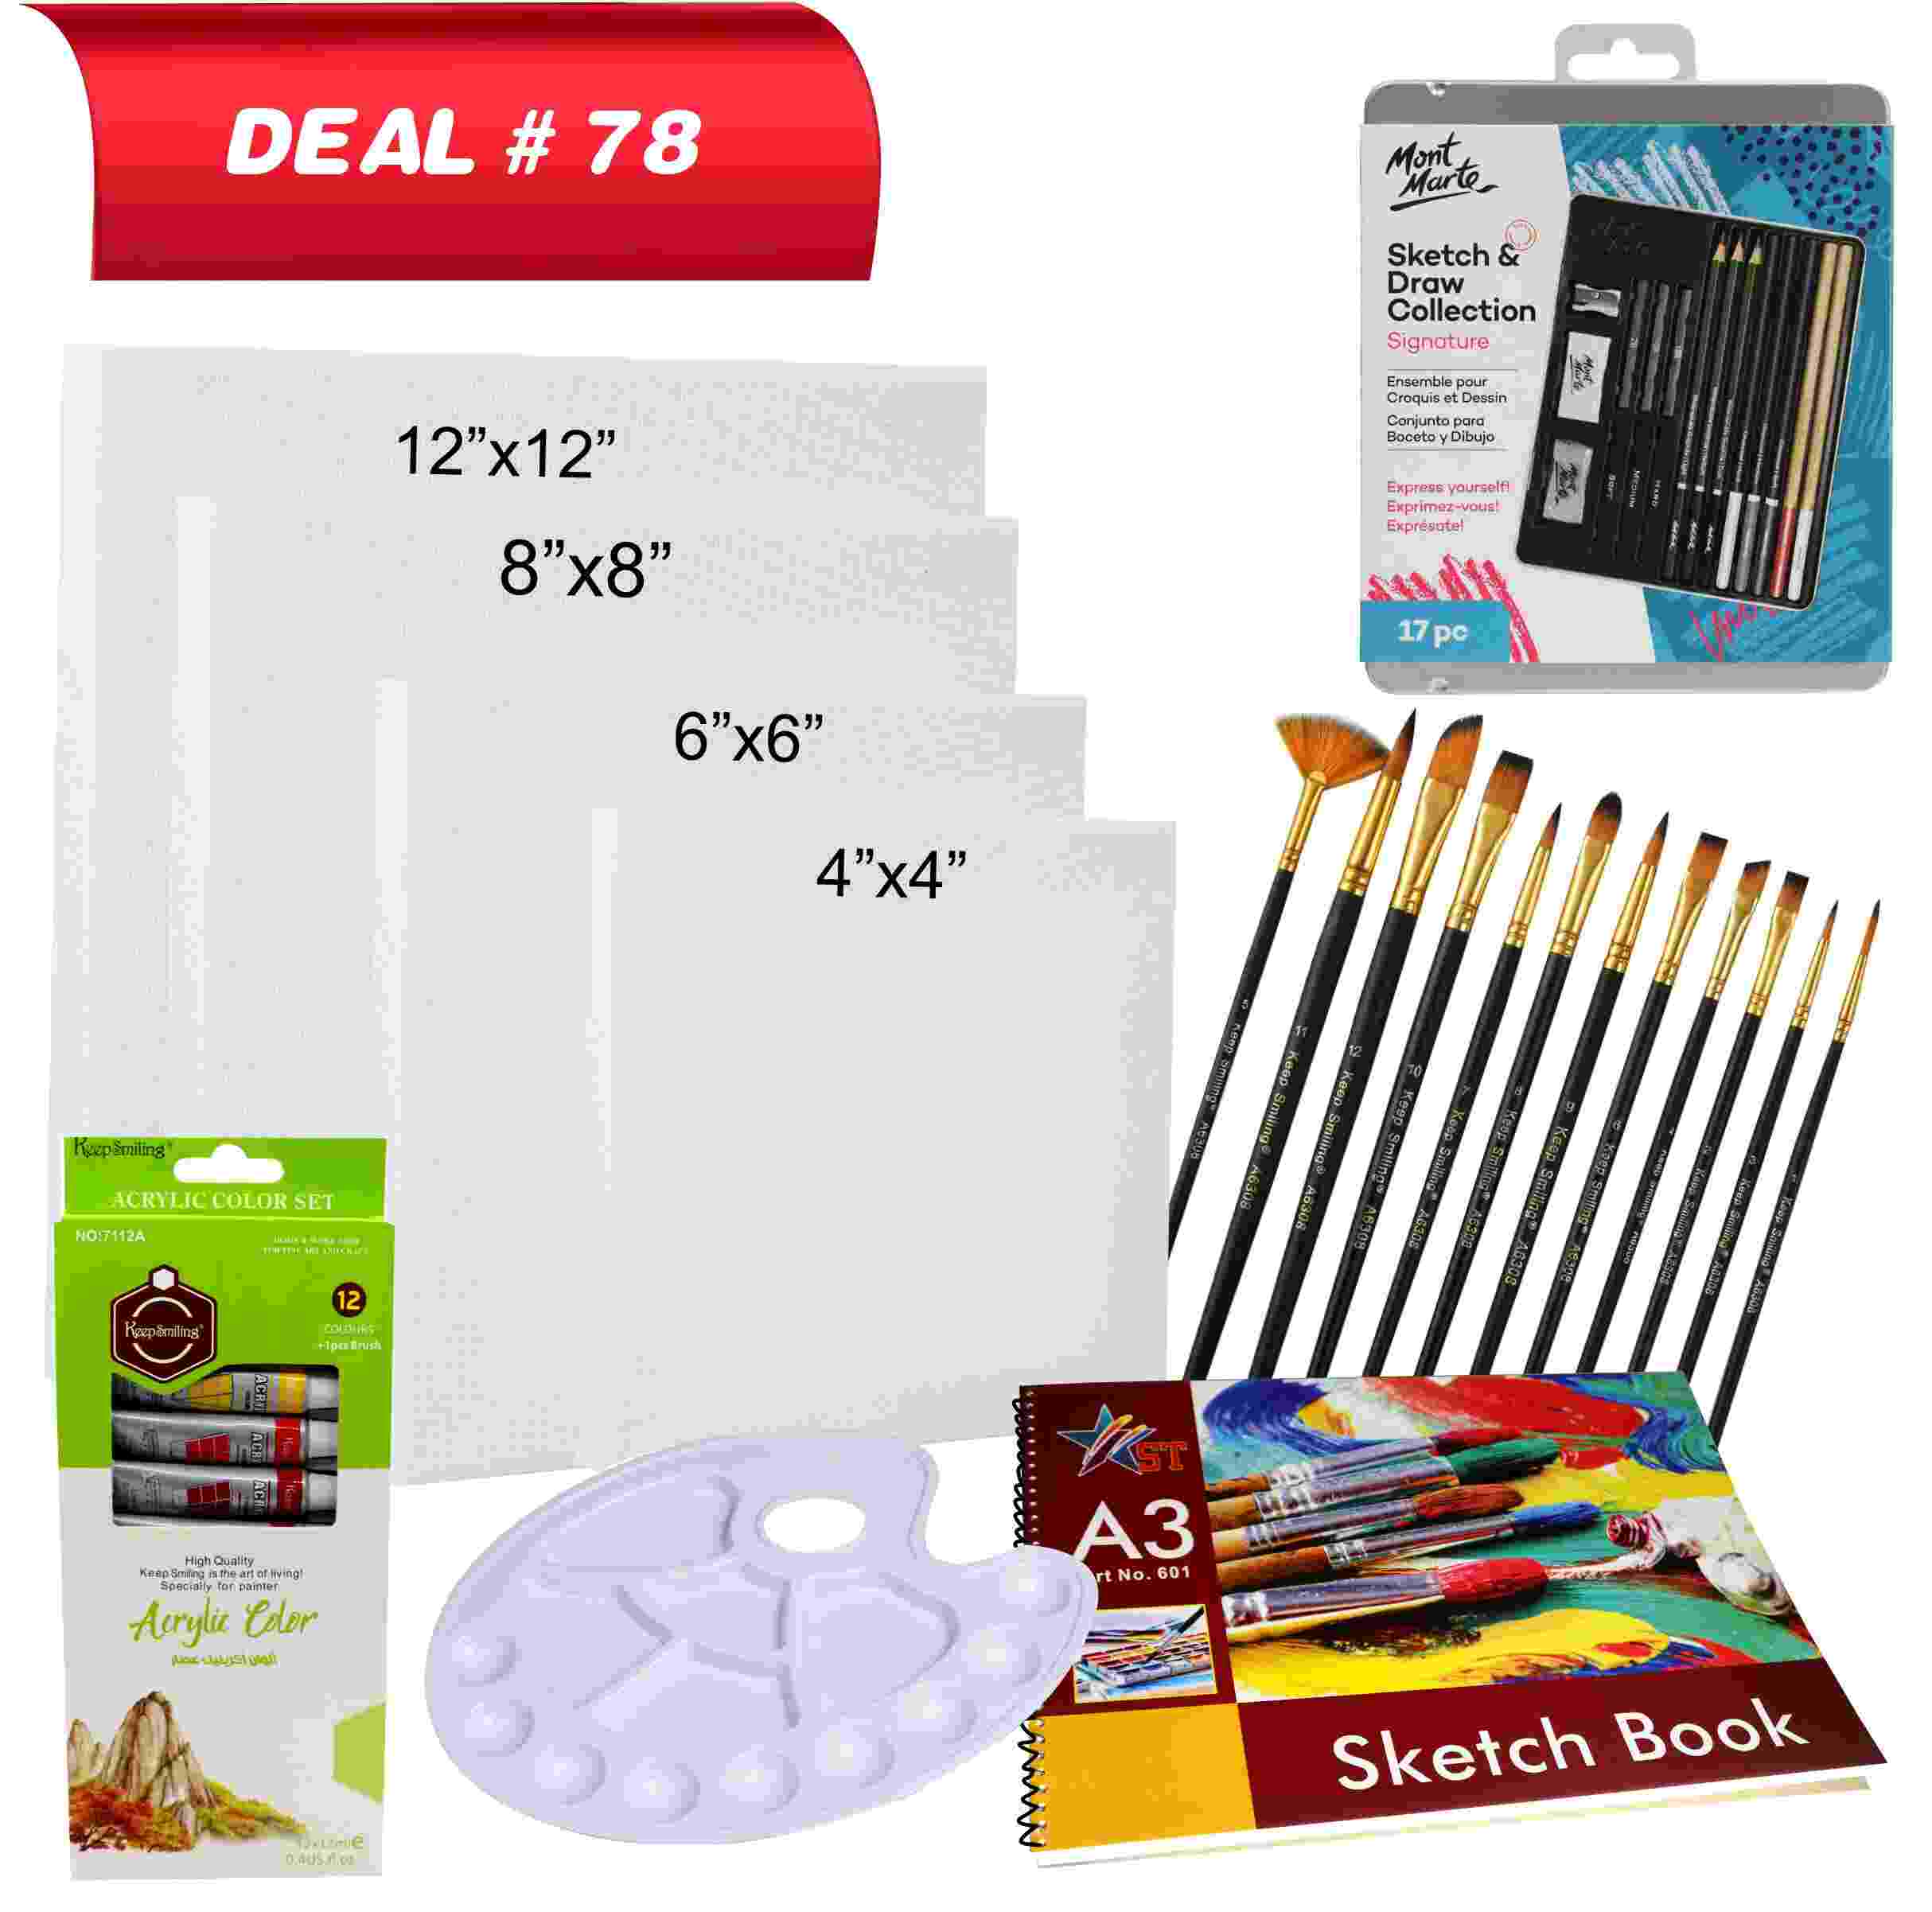 Acrylic & Sketching Deal For Artist, Deal No.78